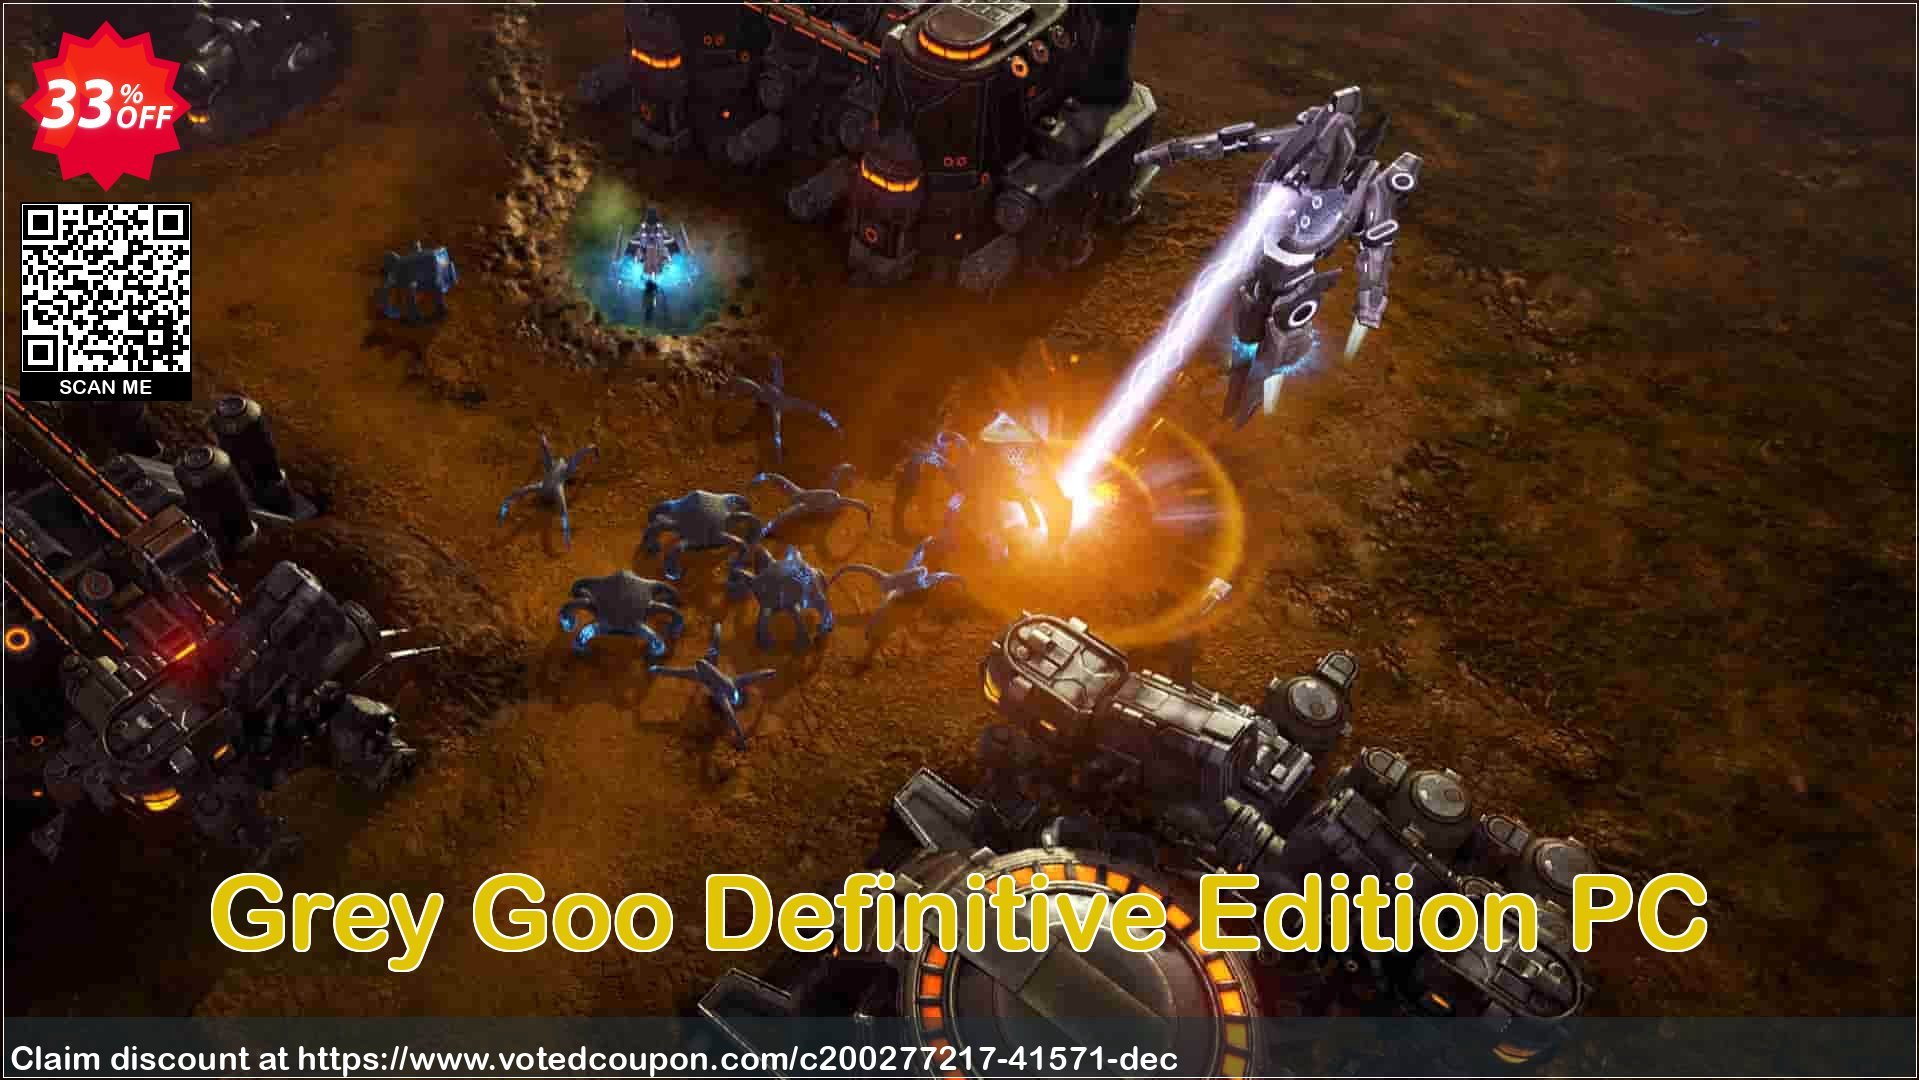 Grey Goo Definitive Edition PC Coupon Code May 2024, 33% OFF - VotedCoupon